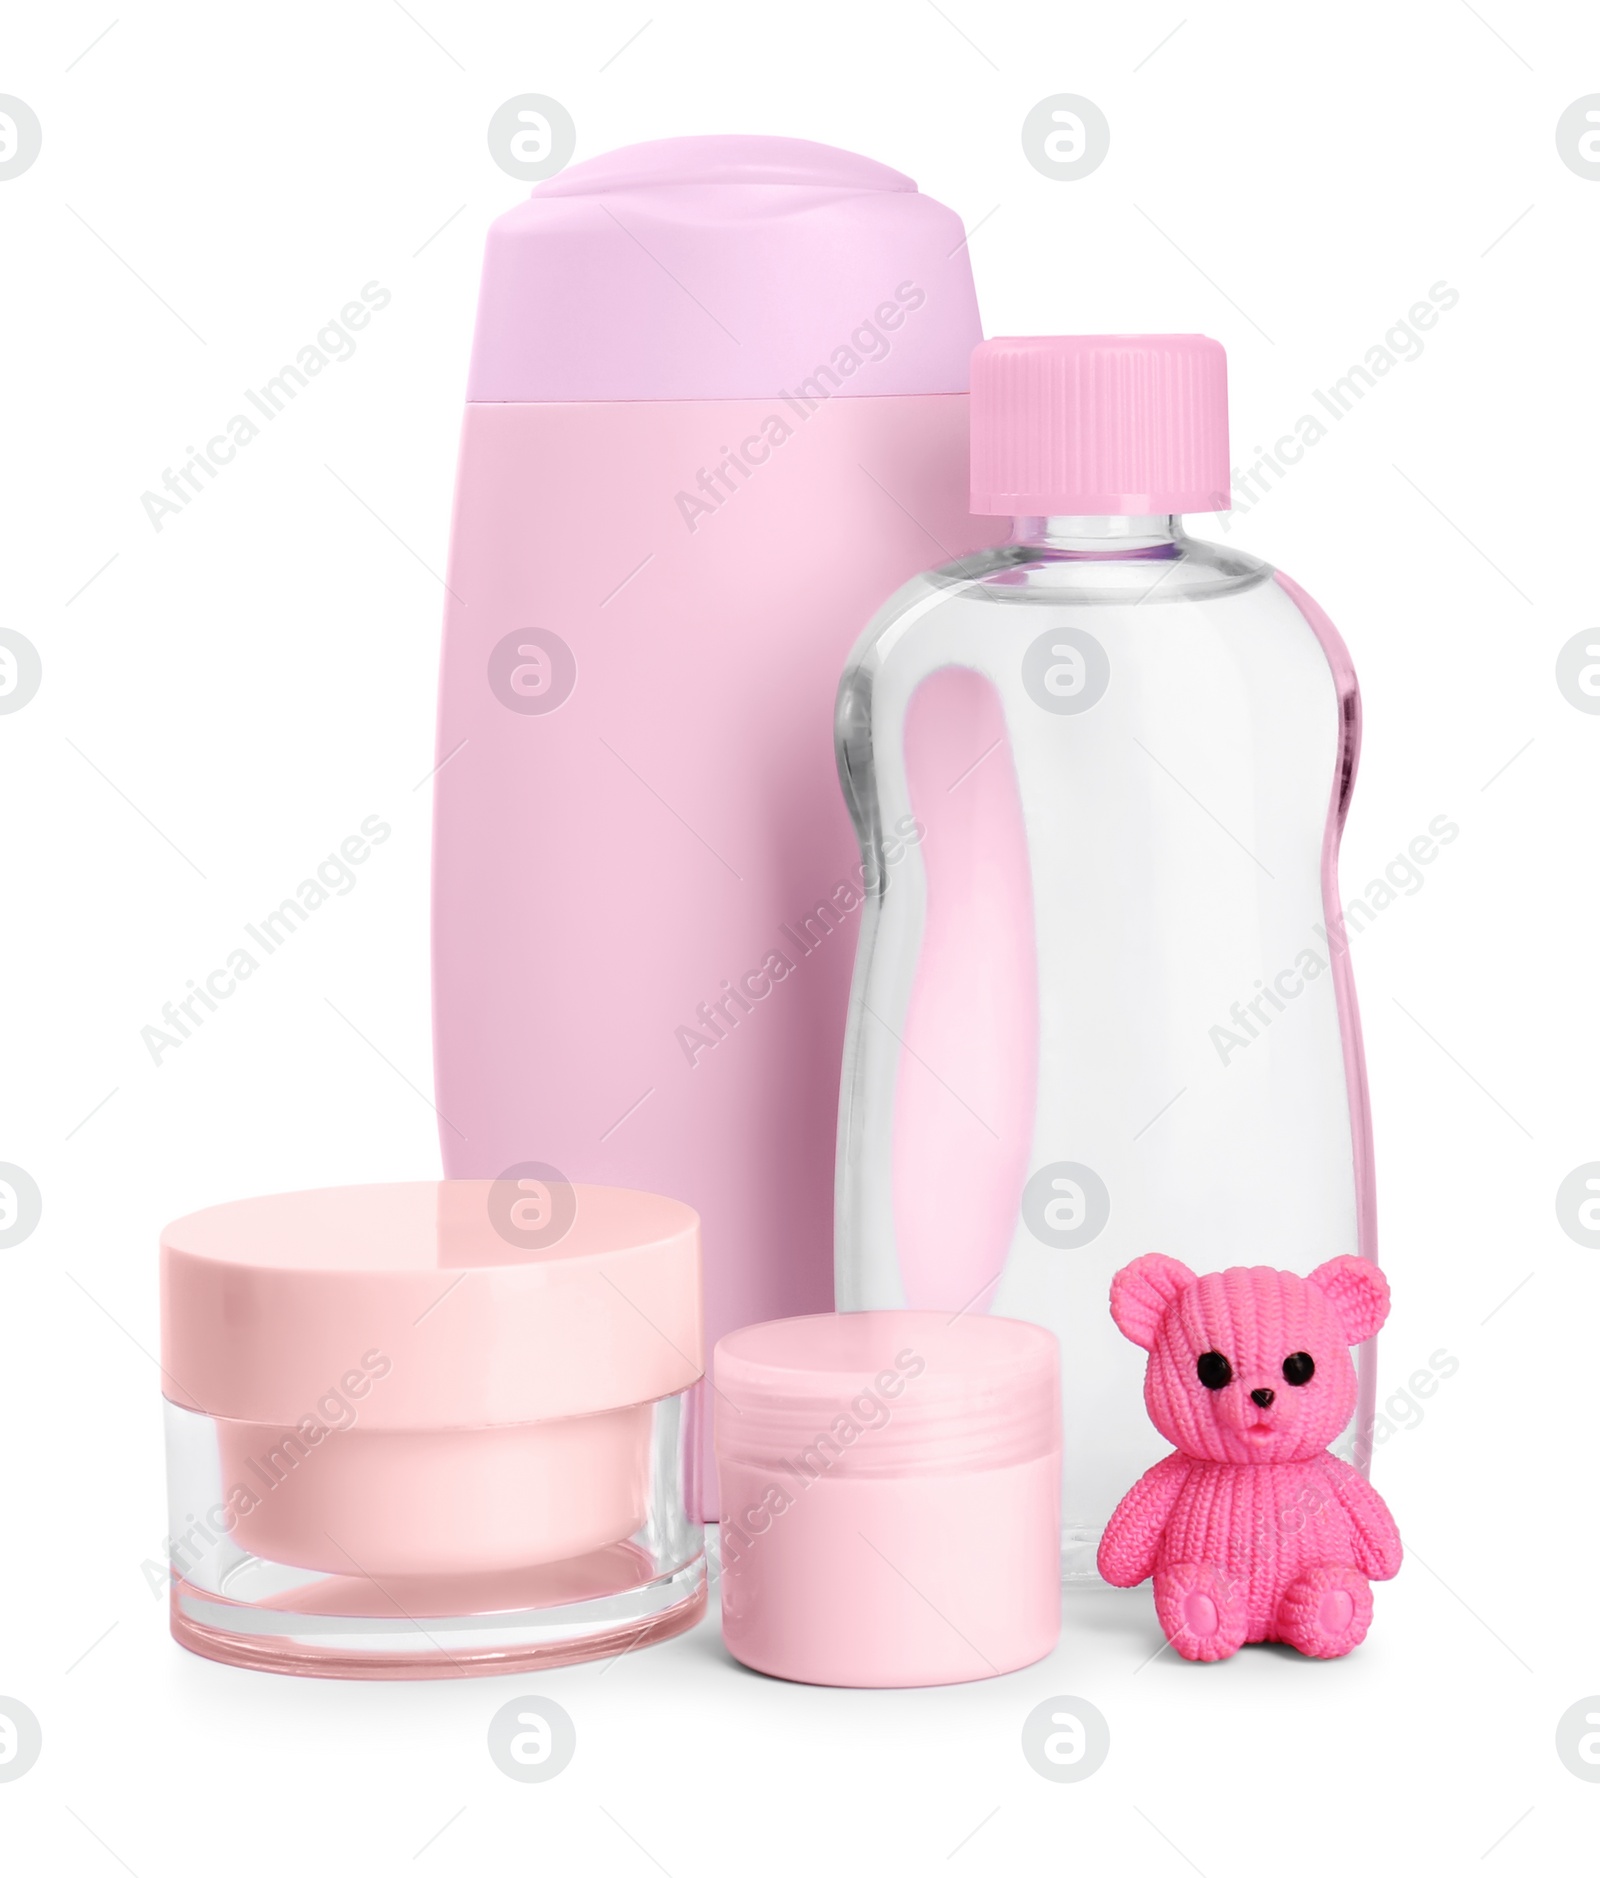 Photo of Different skin care products for baby and toy isolated on white